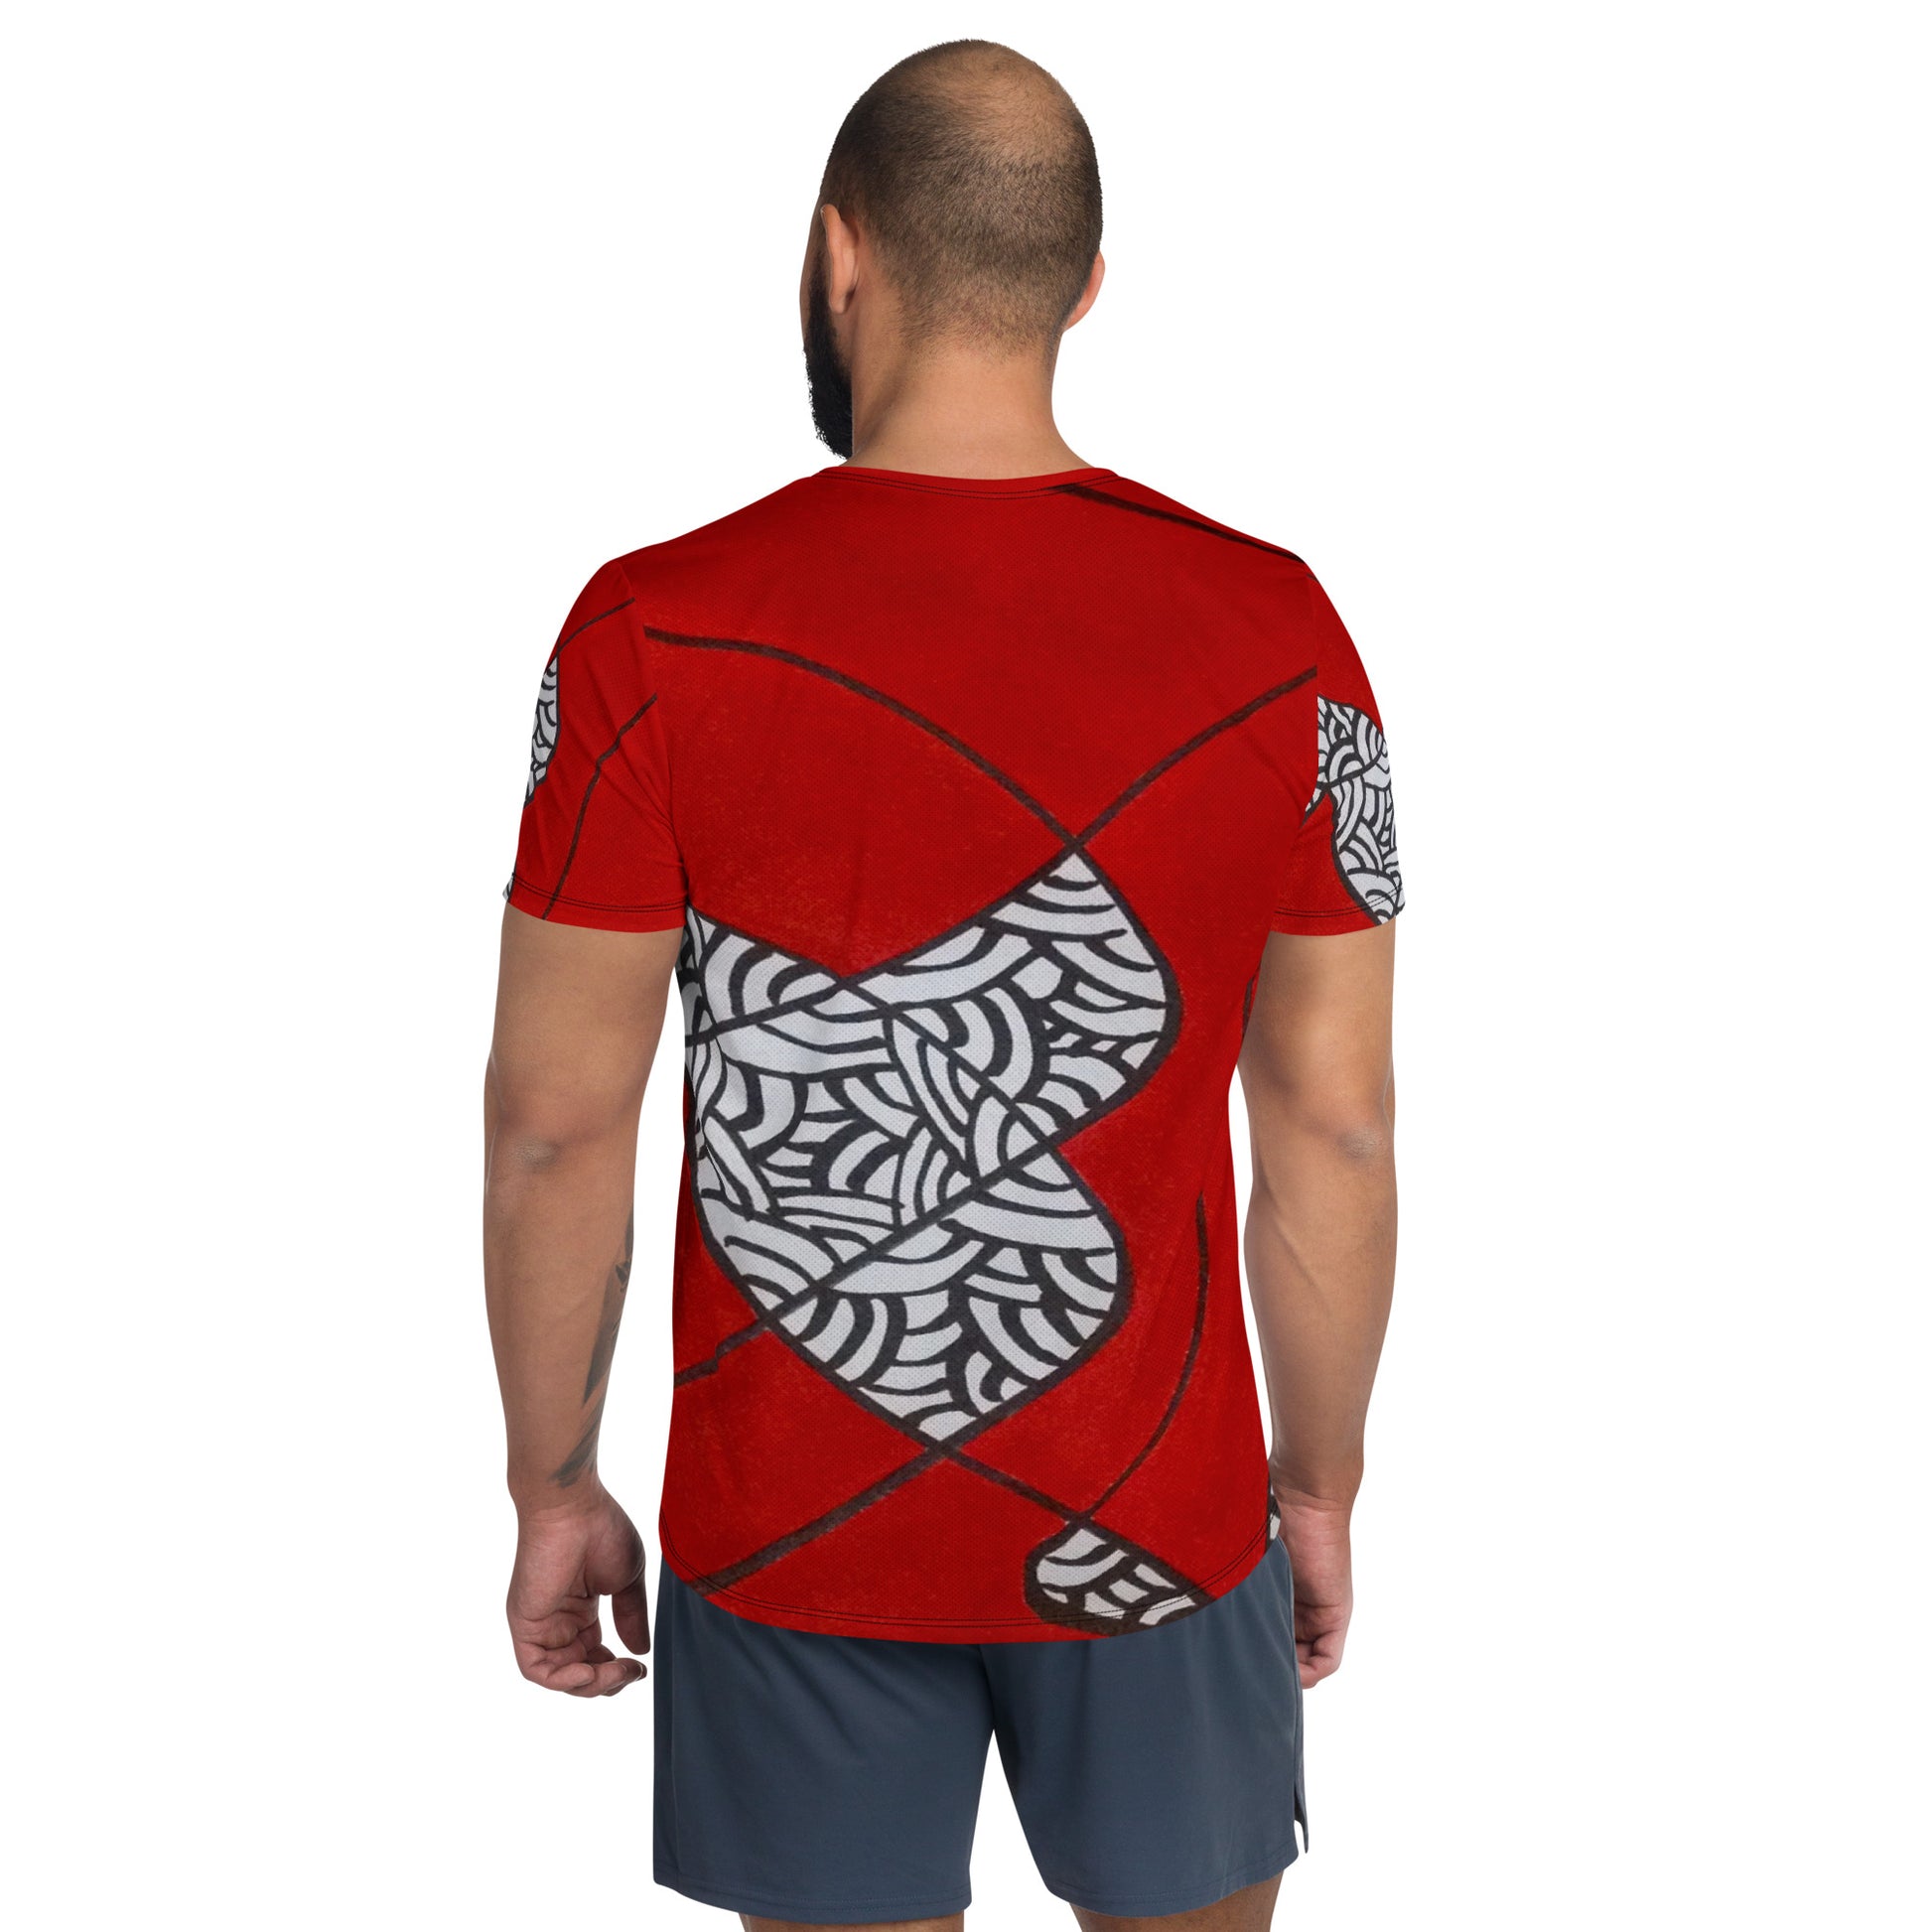 Abstract Men's Athletic T-shirt - O By Onica Online Store